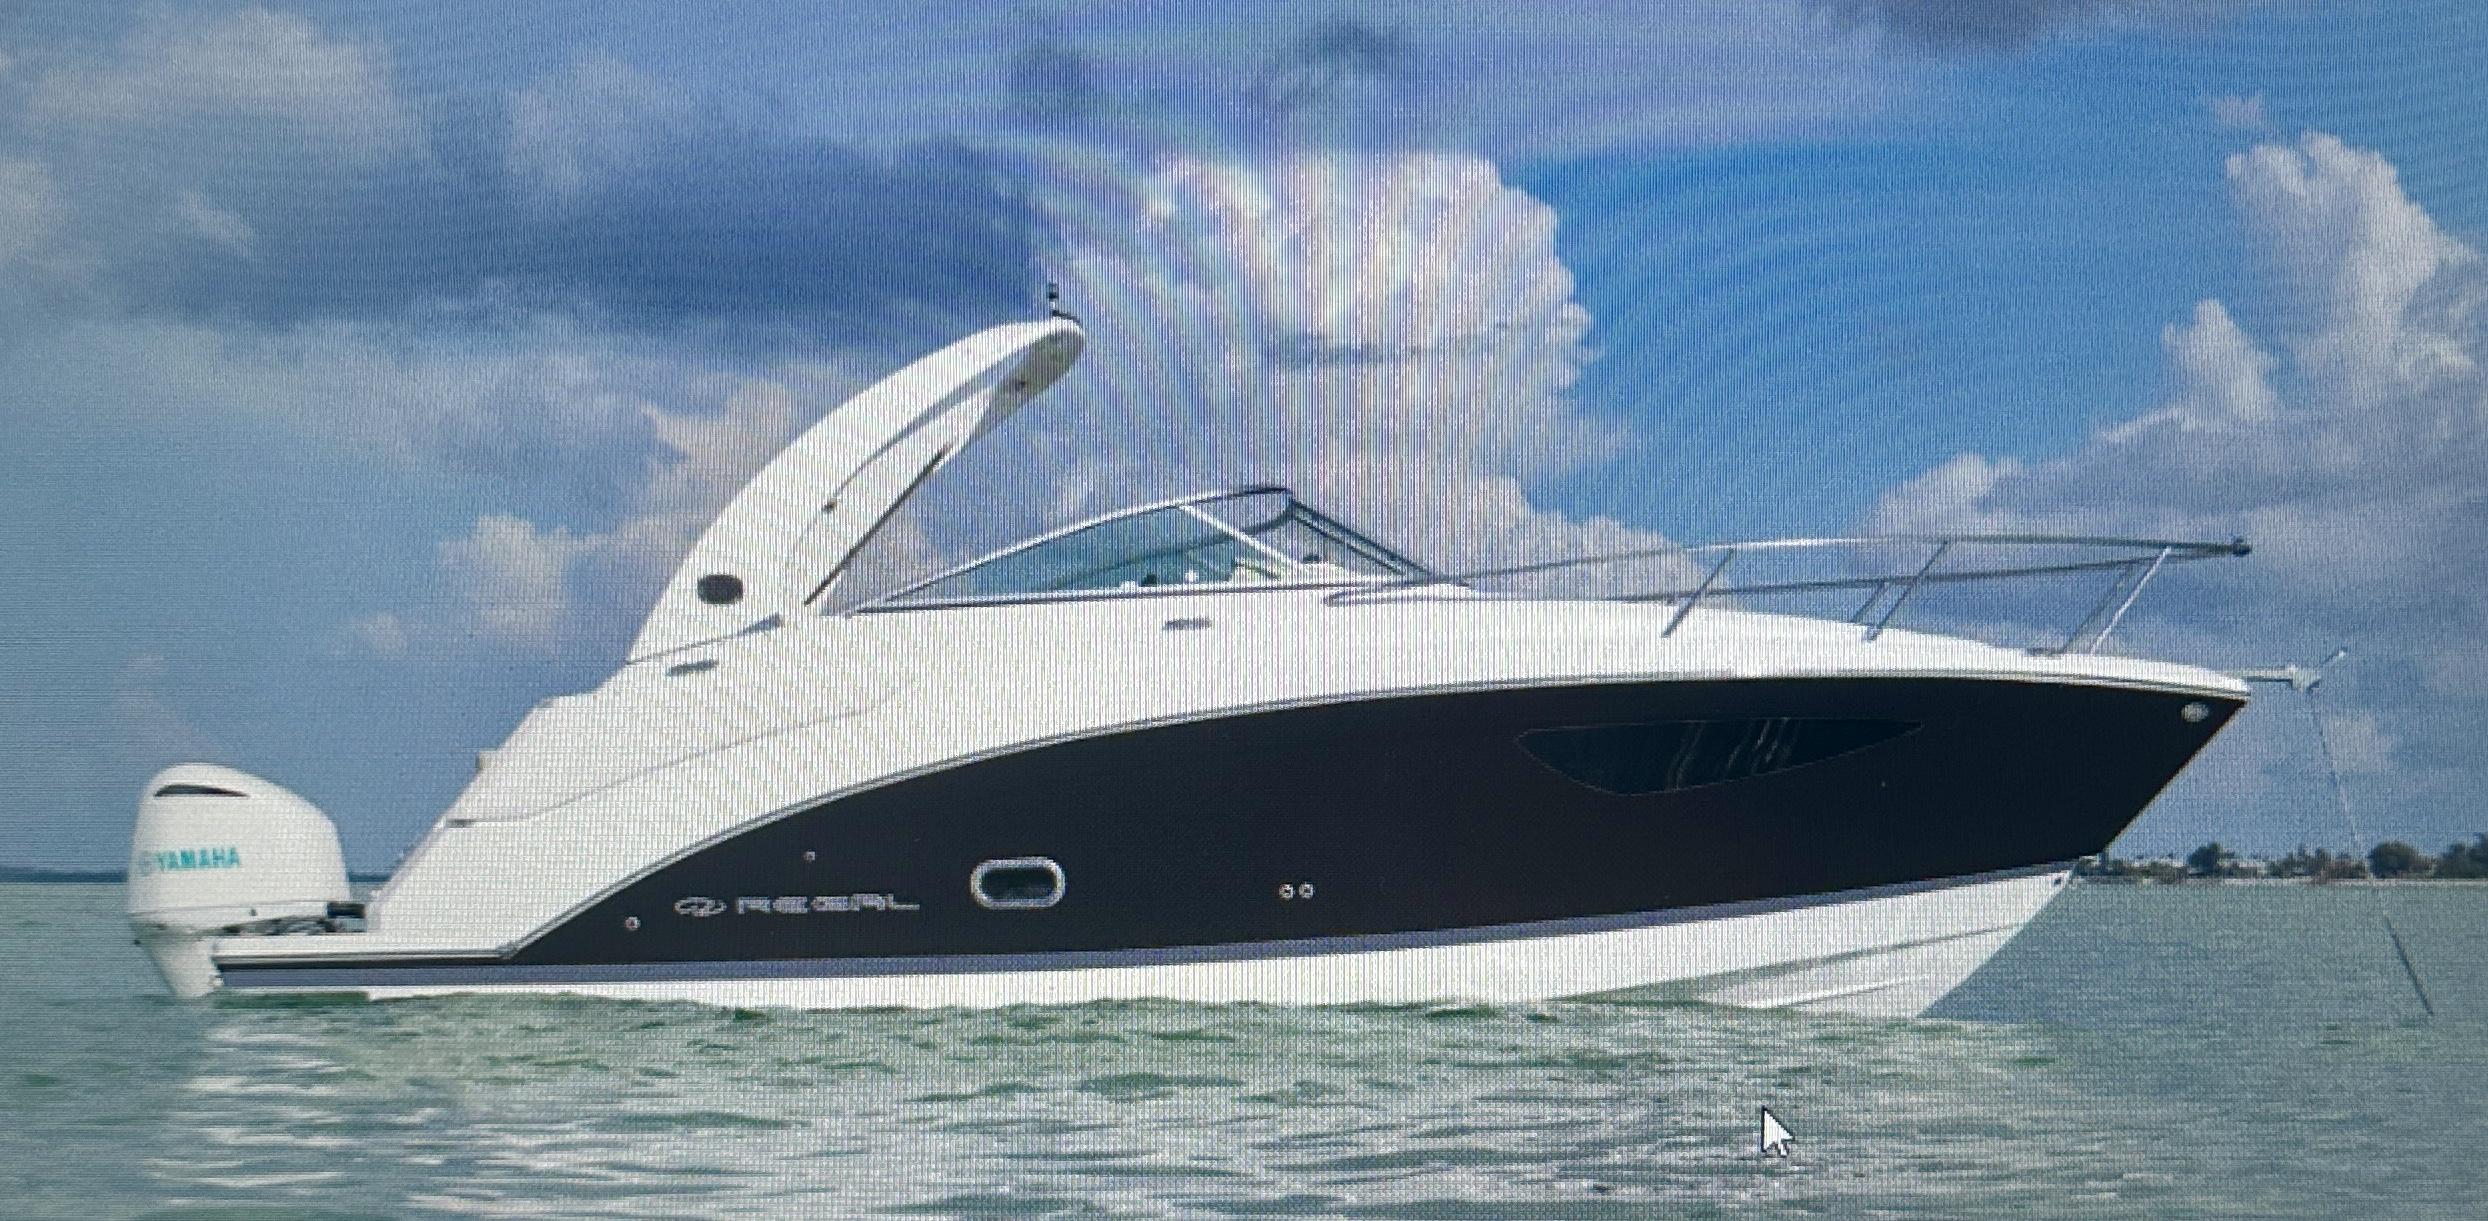 Regal 26 Xo boats for sale - Boat Trader